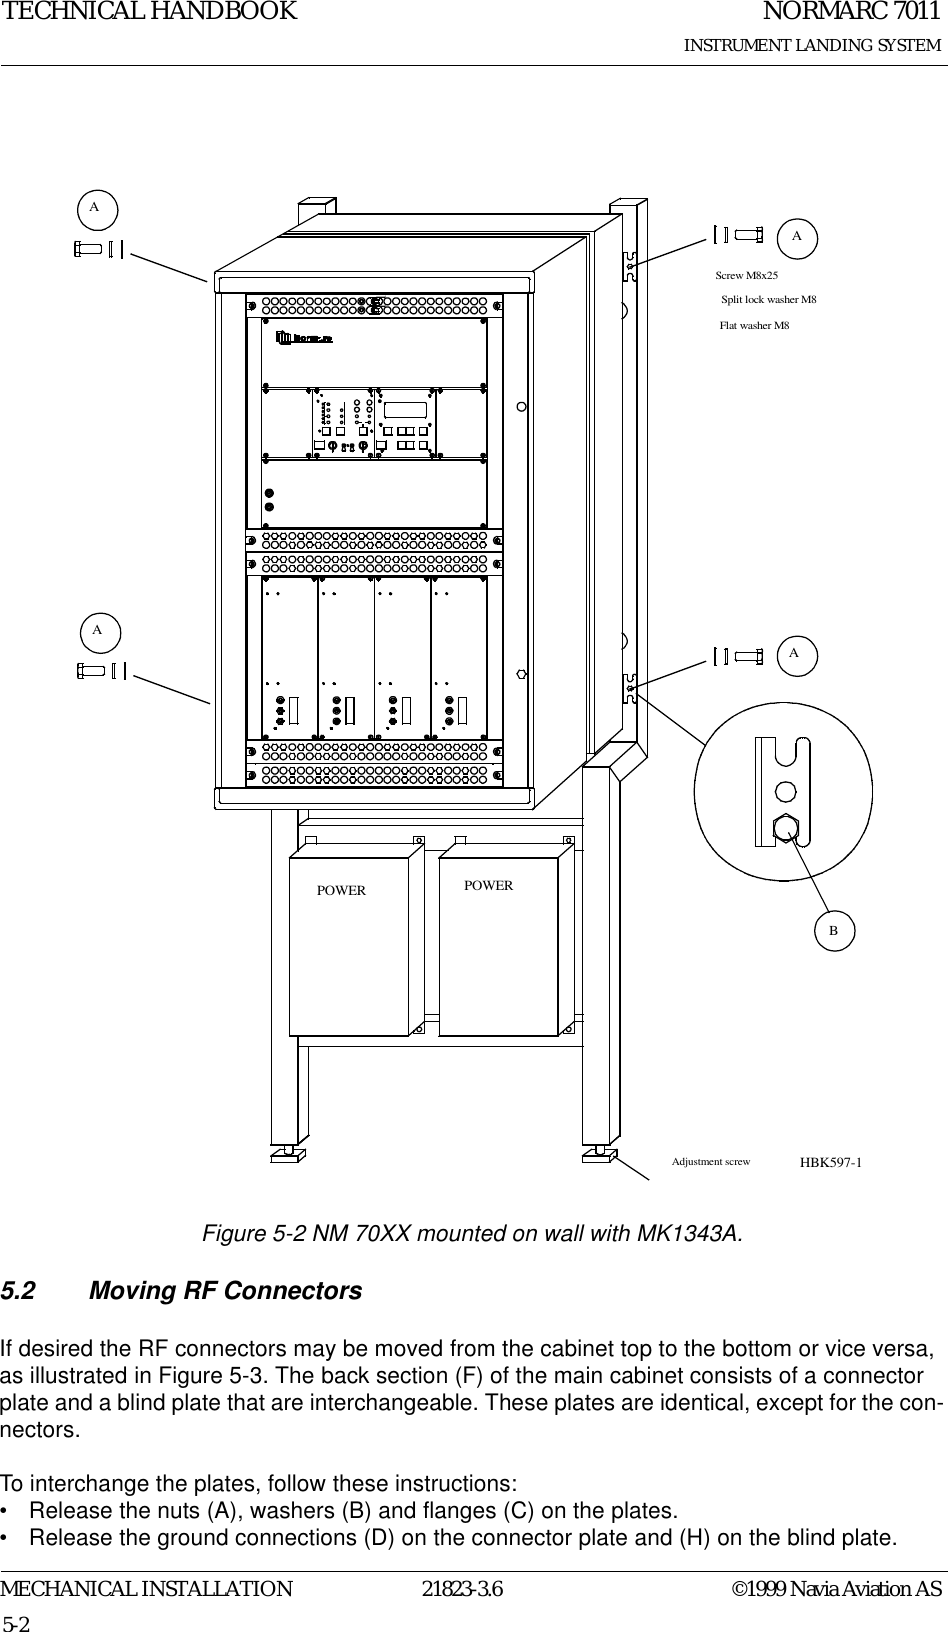 NORMARC 7011INSTRUMENT LANDING SYSTEMTECHNICAL HANDBOOKMECHANICAL INSTALLATION 21823-3.6 ©1999 Navia Aviation AS5-2Figure 5-2 NM 70XX mounted on wall with MK1343A.5.2 Moving RF ConnectorsIf desired the RF connectors may be moved from the cabinet top to the bottom or vice versa, as illustrated in Figure 5-3. The back section (F) of the main cabinet consists of a connector plate and a blind plate that are interchangeable. These plates are identical, except for the con-nectors. To interchange the plates, follow these instructions:• Release the nuts (A), washers (B) and flanges (C) on the plates.• Release the ground connections (D) on the connector plate and (H) on the blind plate.POWER POWERAdjustment screw11Flat washer M8Split lock washer M8Screw M8x25BAAAAHBK597-1